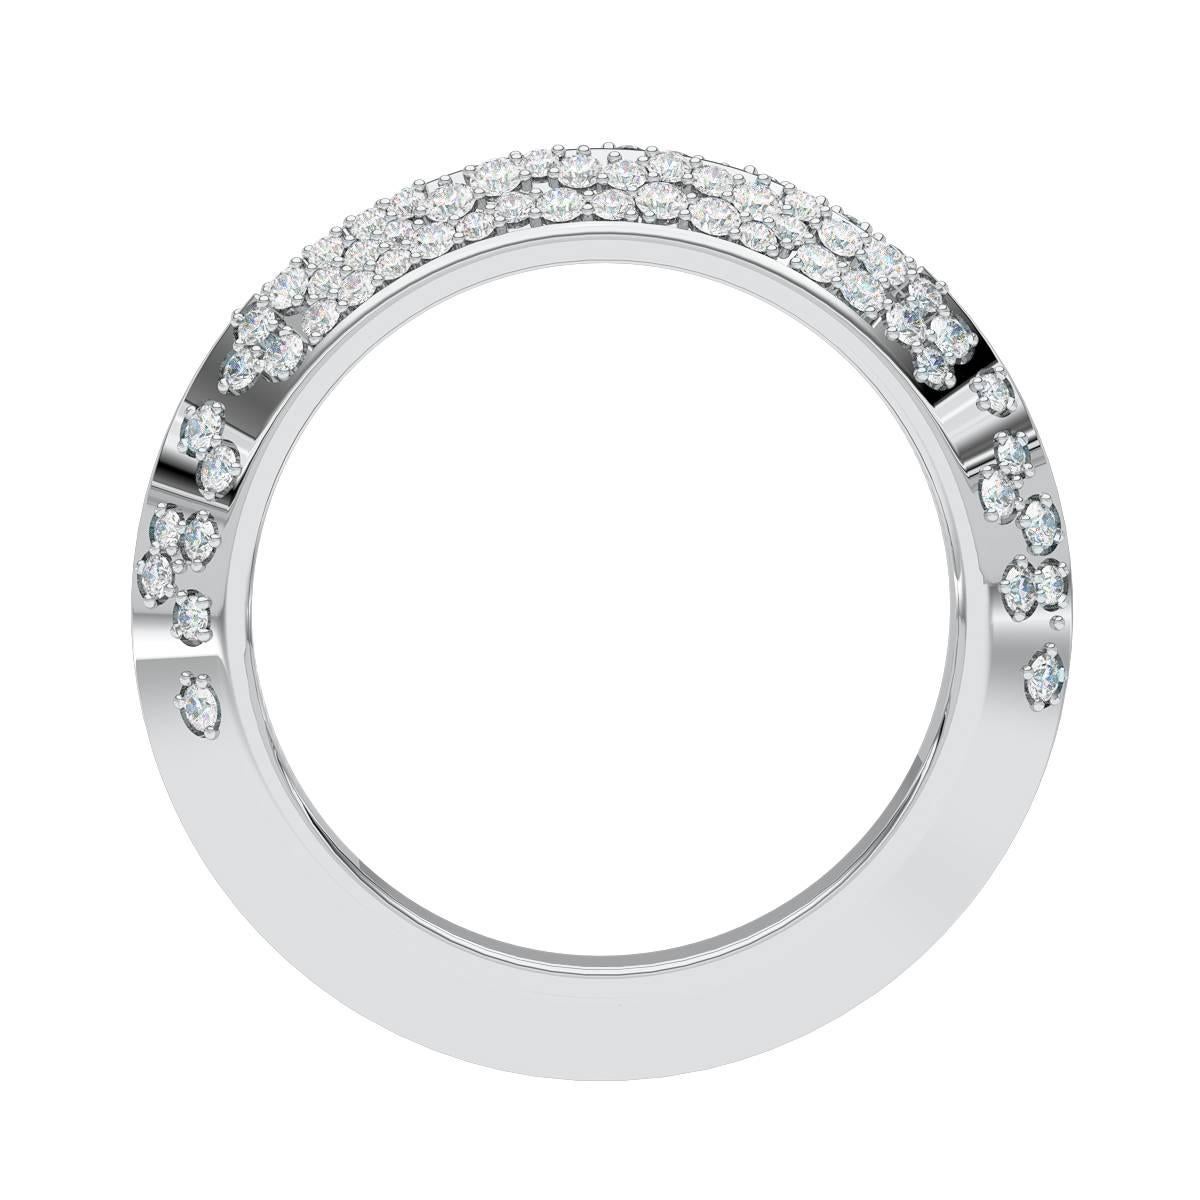 This elegant diamond pave eternity band ring is handcrafted in Sydney in 18 karat white gold, and set with .8ct of top quality diamonds. The knife edge design of the band is timeless and contemporary. This beautiful ring would make a superb wedding